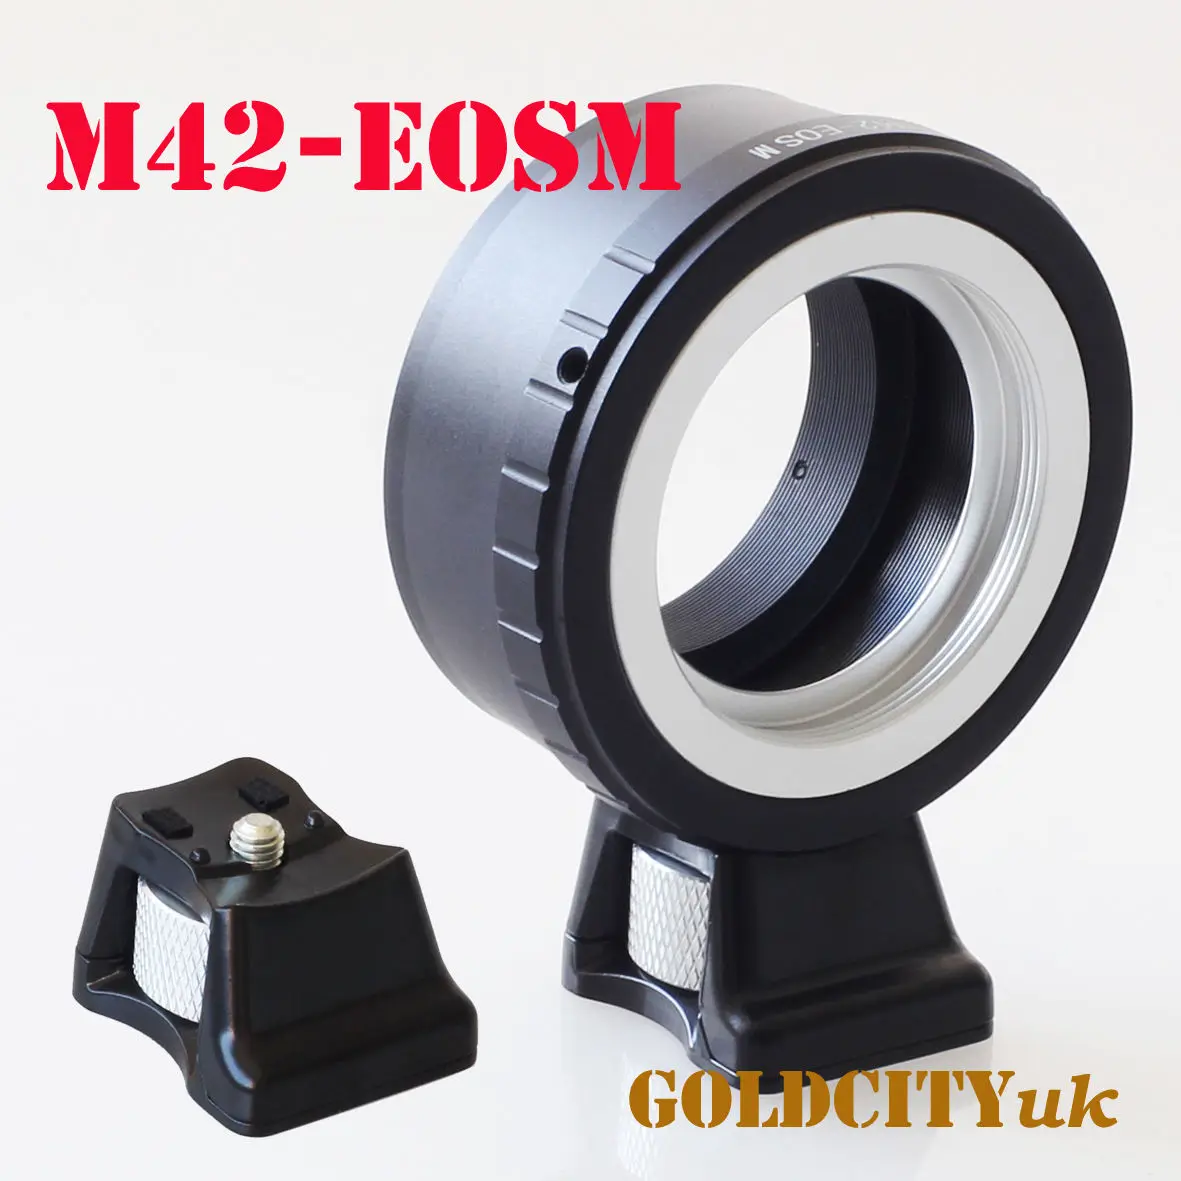 

Adapter Ring with Tripod Stand for M42 42mm Lens to canon EOSM EF-M Mirrorless Camera eosm/m1/m2/m3/m5/m6/m10/m50/m100